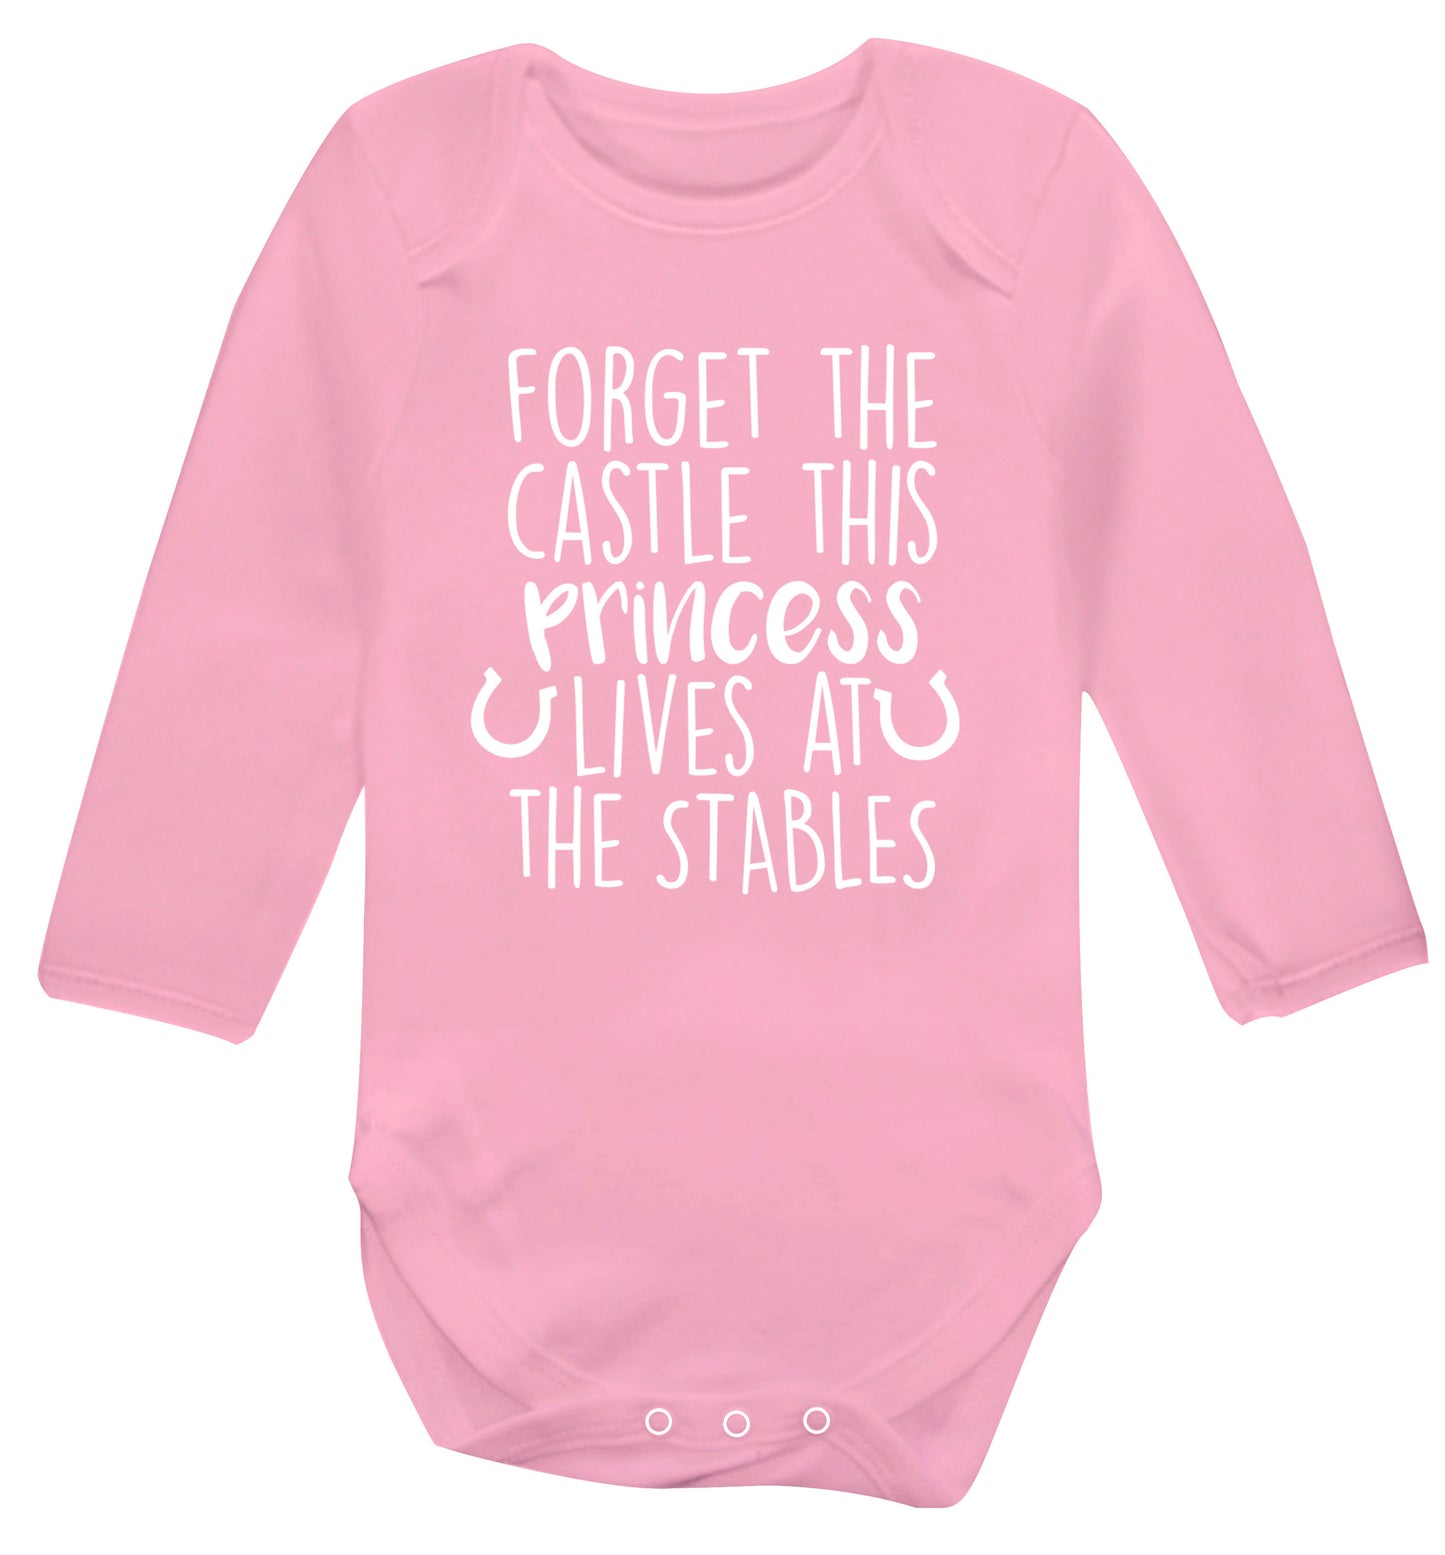 Forget the castle this princess lives at the stables Baby Vest long sleeved pale pink 6-12 months